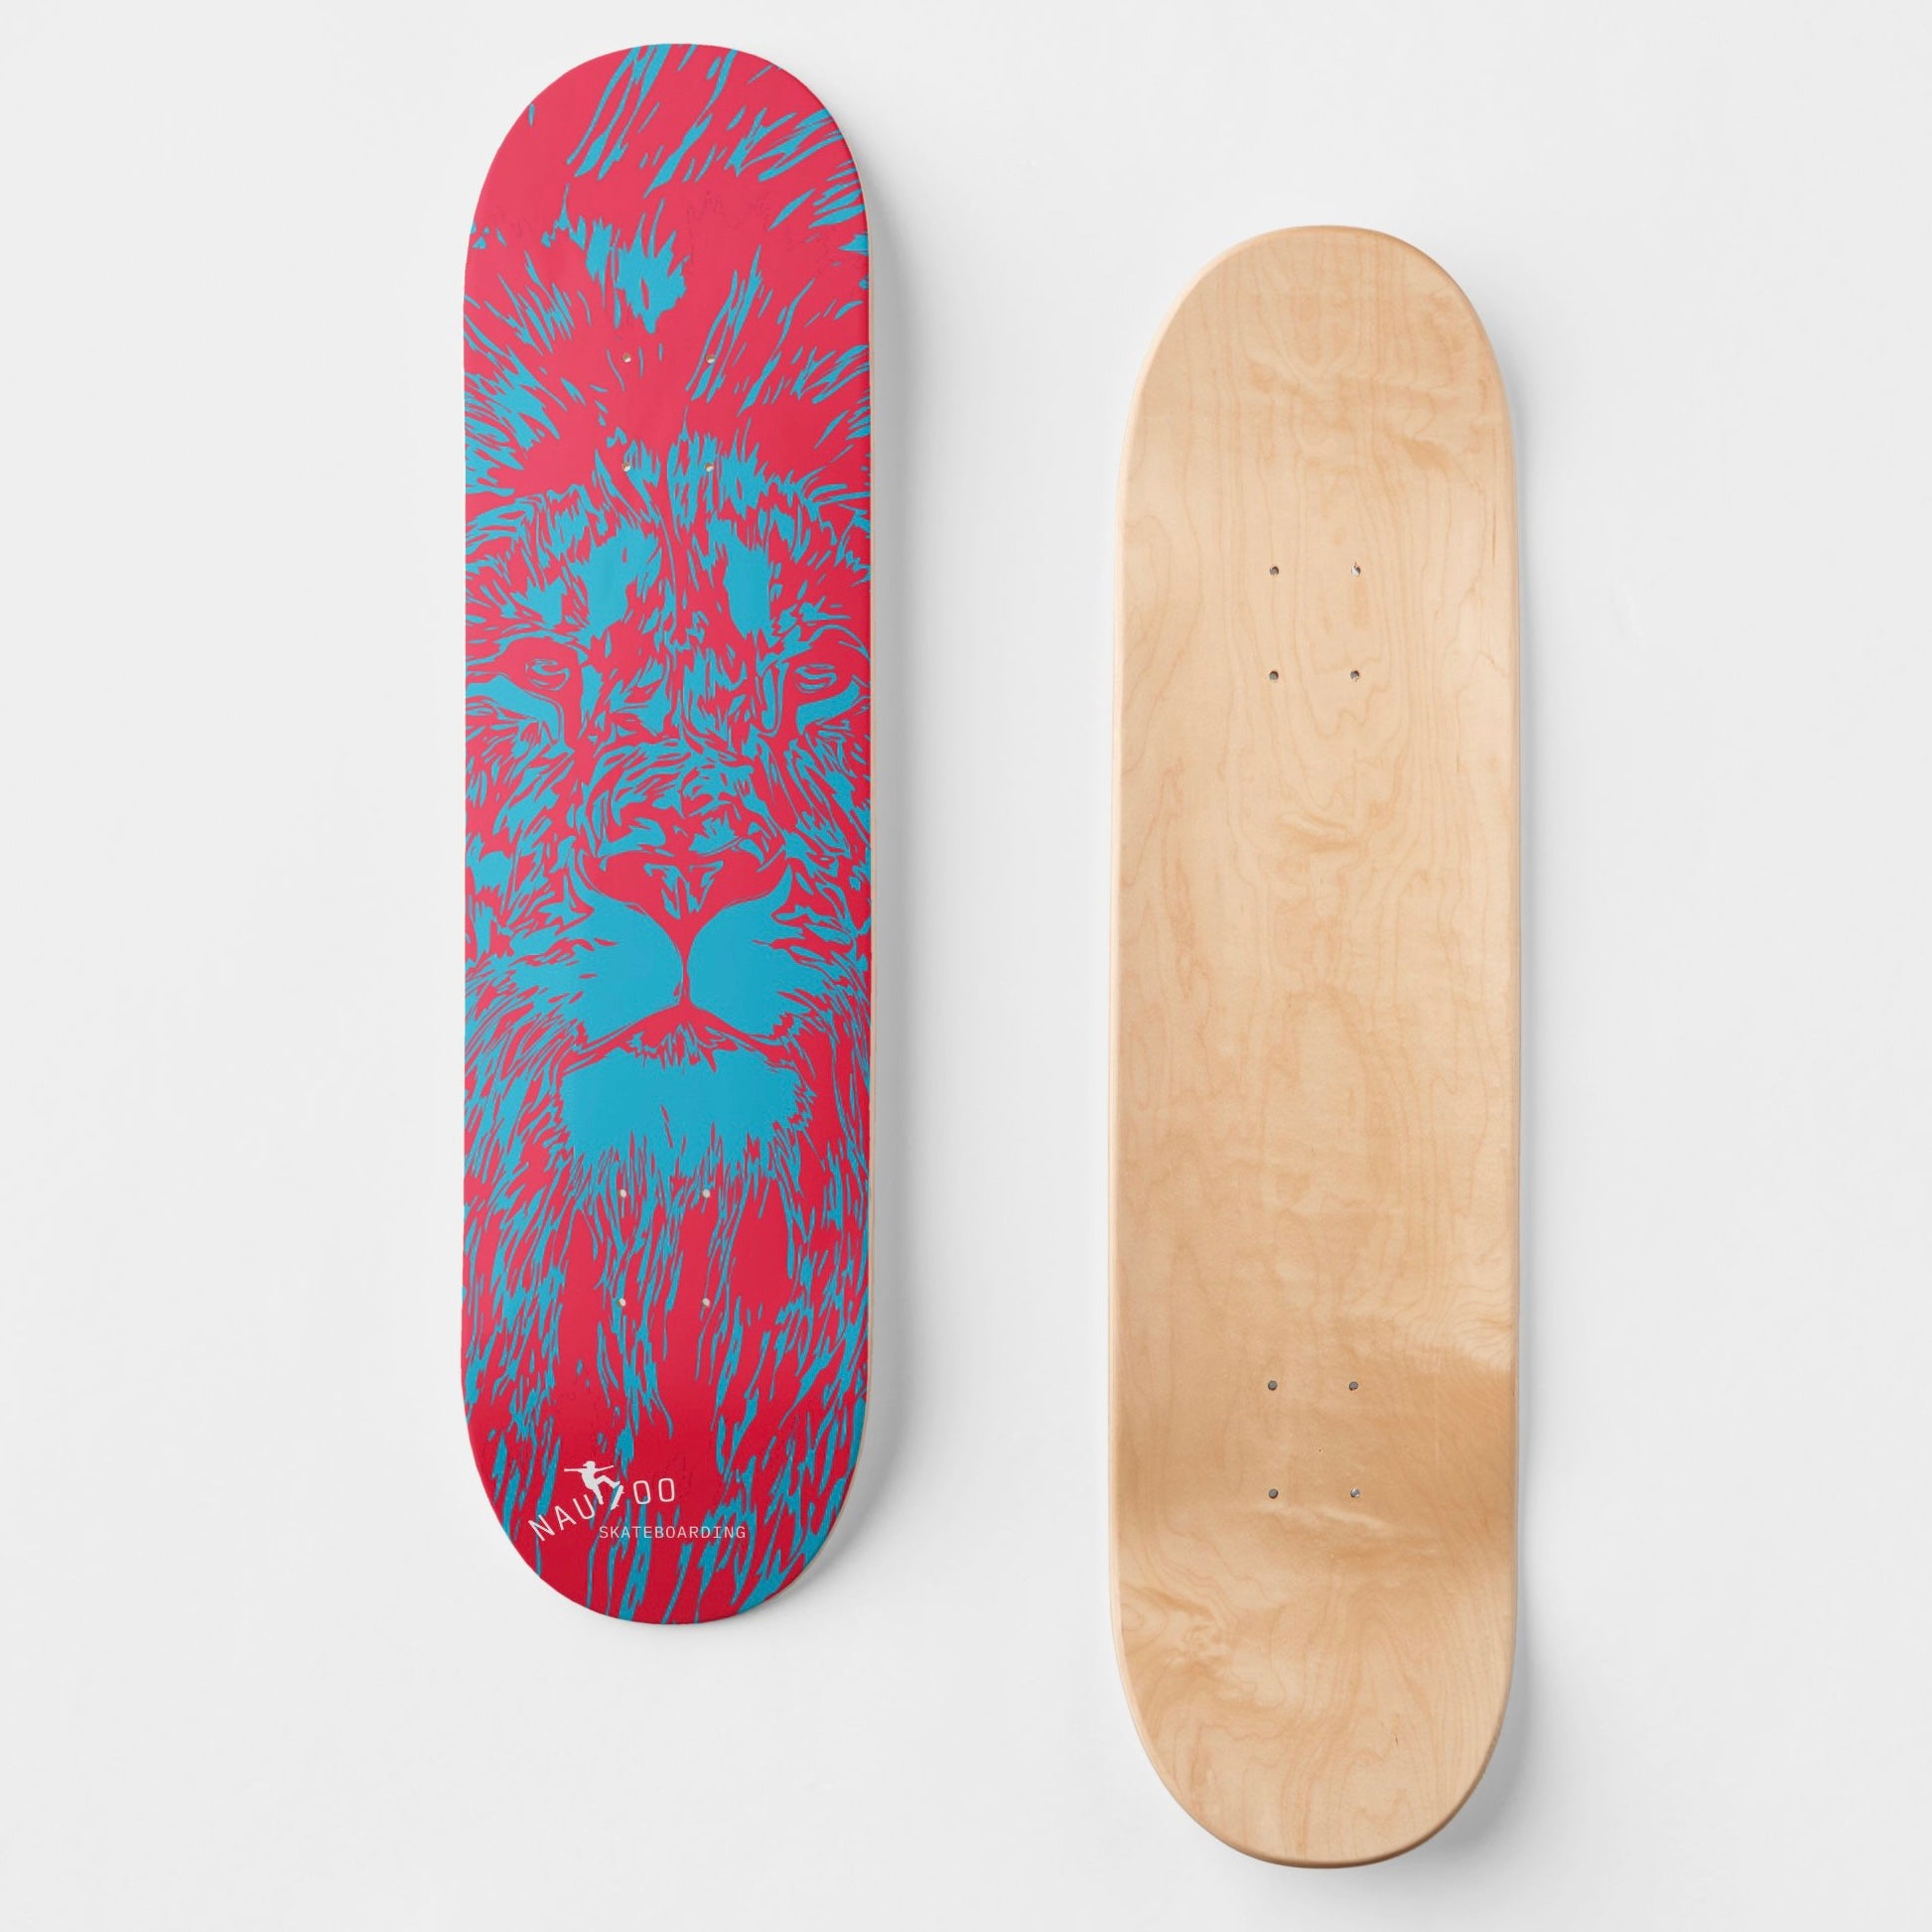 Nauvoo Skateboarding lion head deck, blue and red, maple